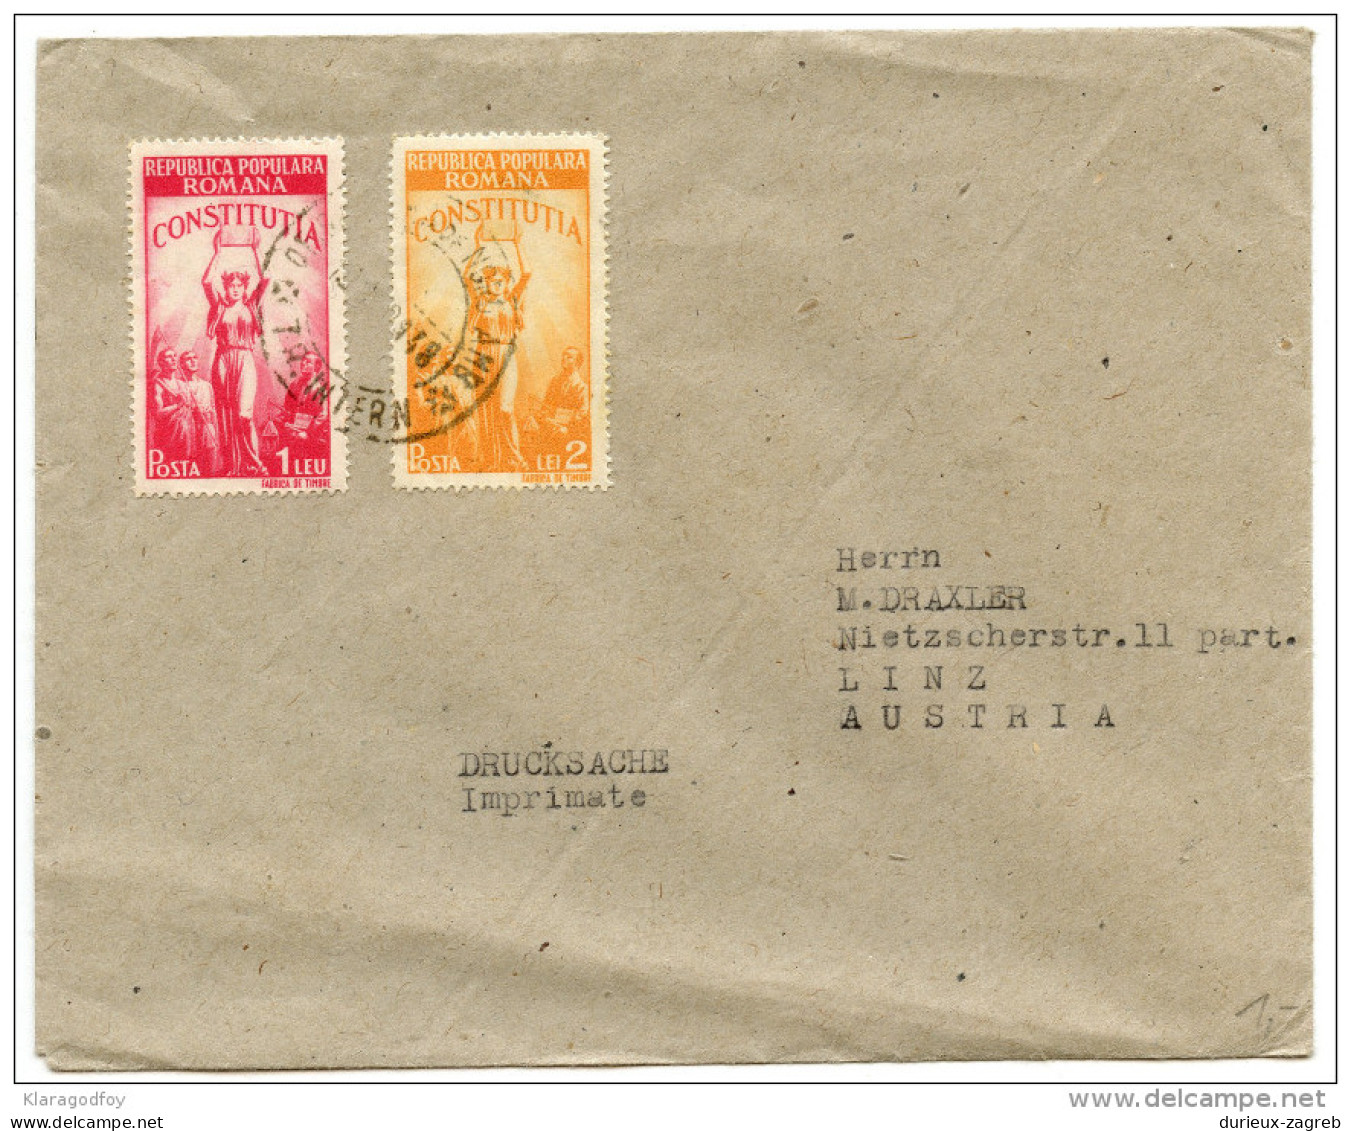 Romania Letter Cover Travelled 1948 To Linz Bb160110 - Covers & Documents